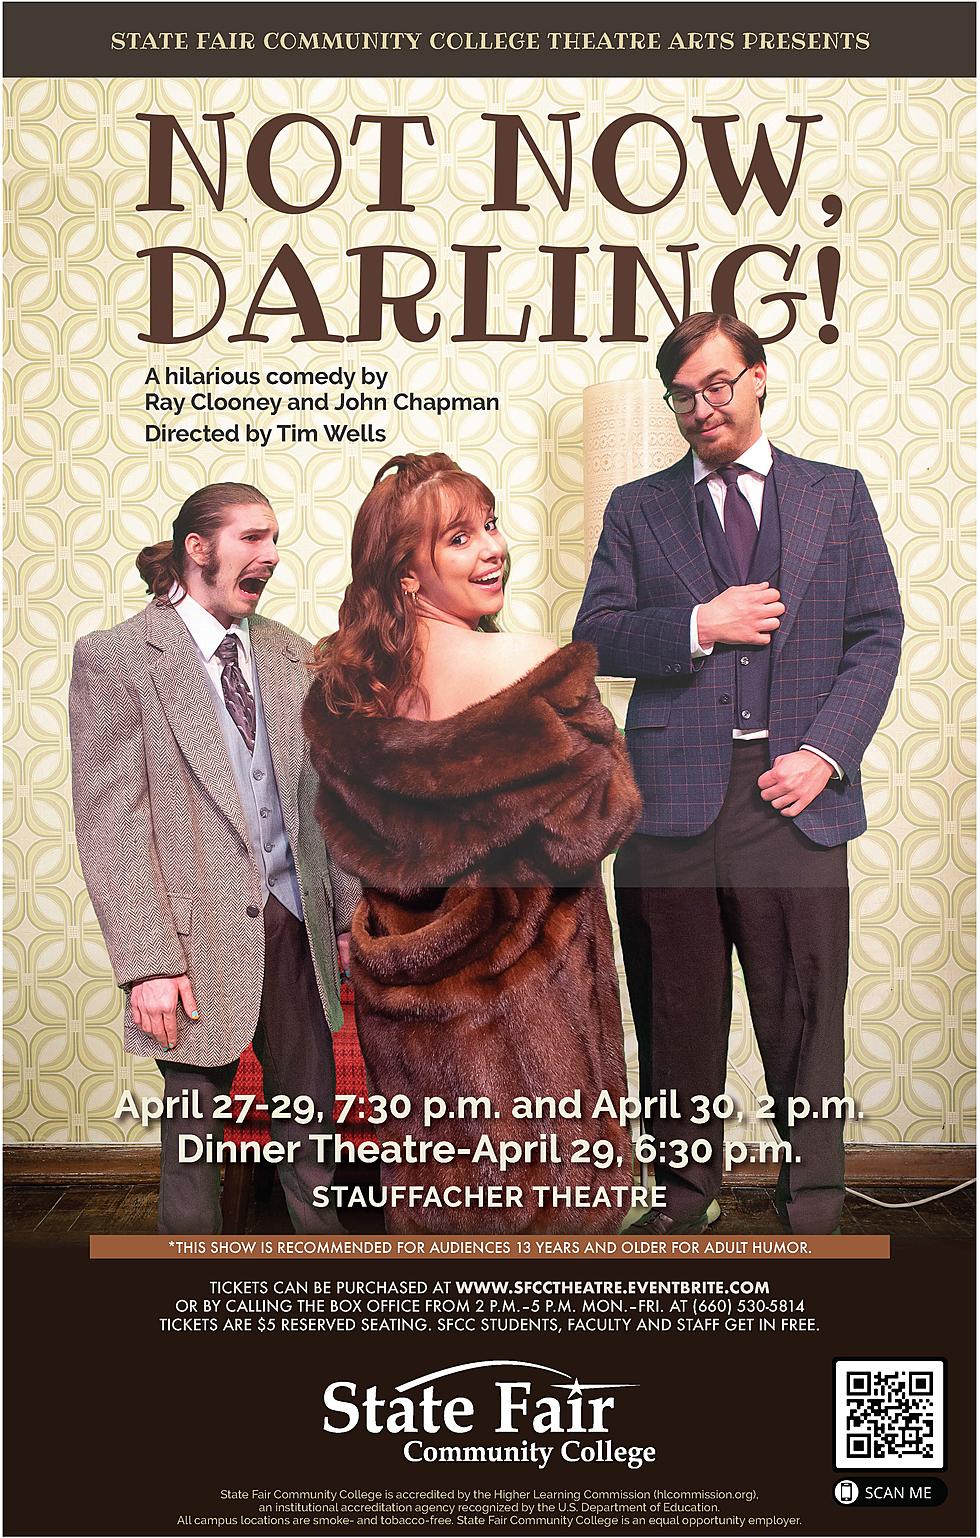 SFCC Theatre Arts to present ‘Not Now, Darling!’